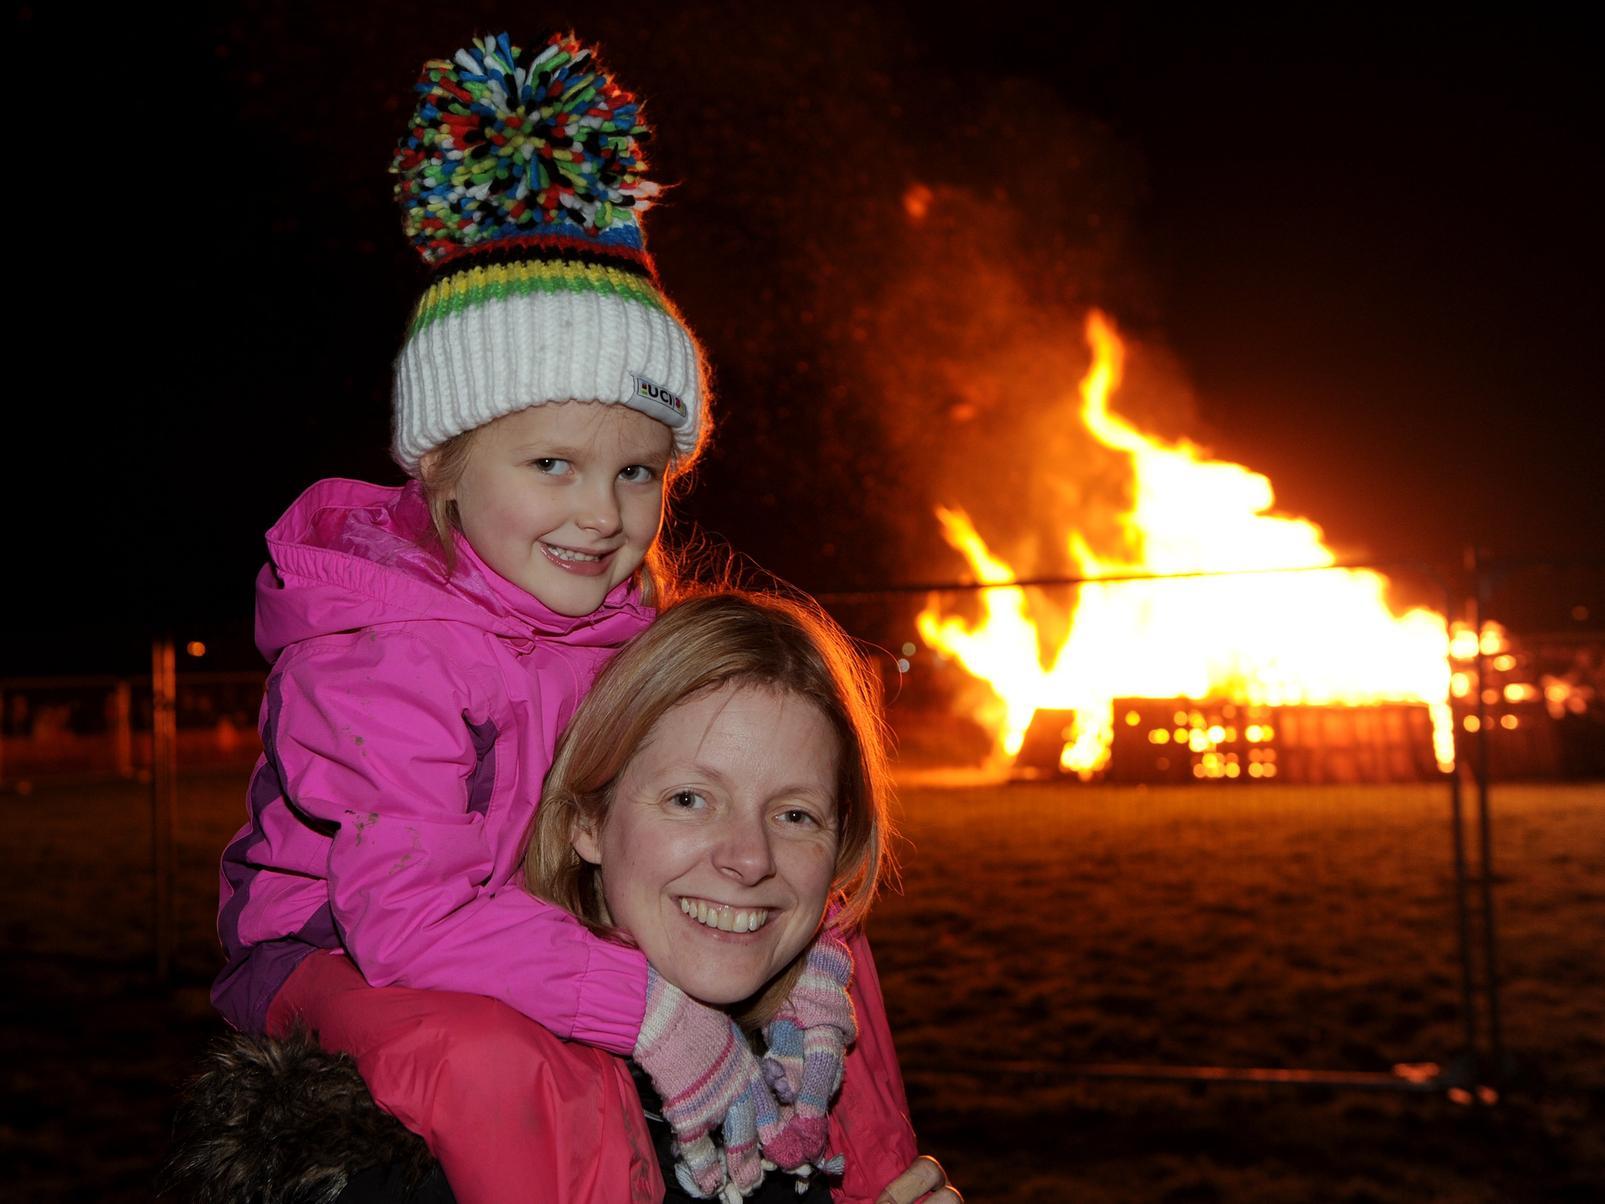 Four-year-old Charlotte Miles with her mum Heather watching Charlotte's dad light the bonfire.